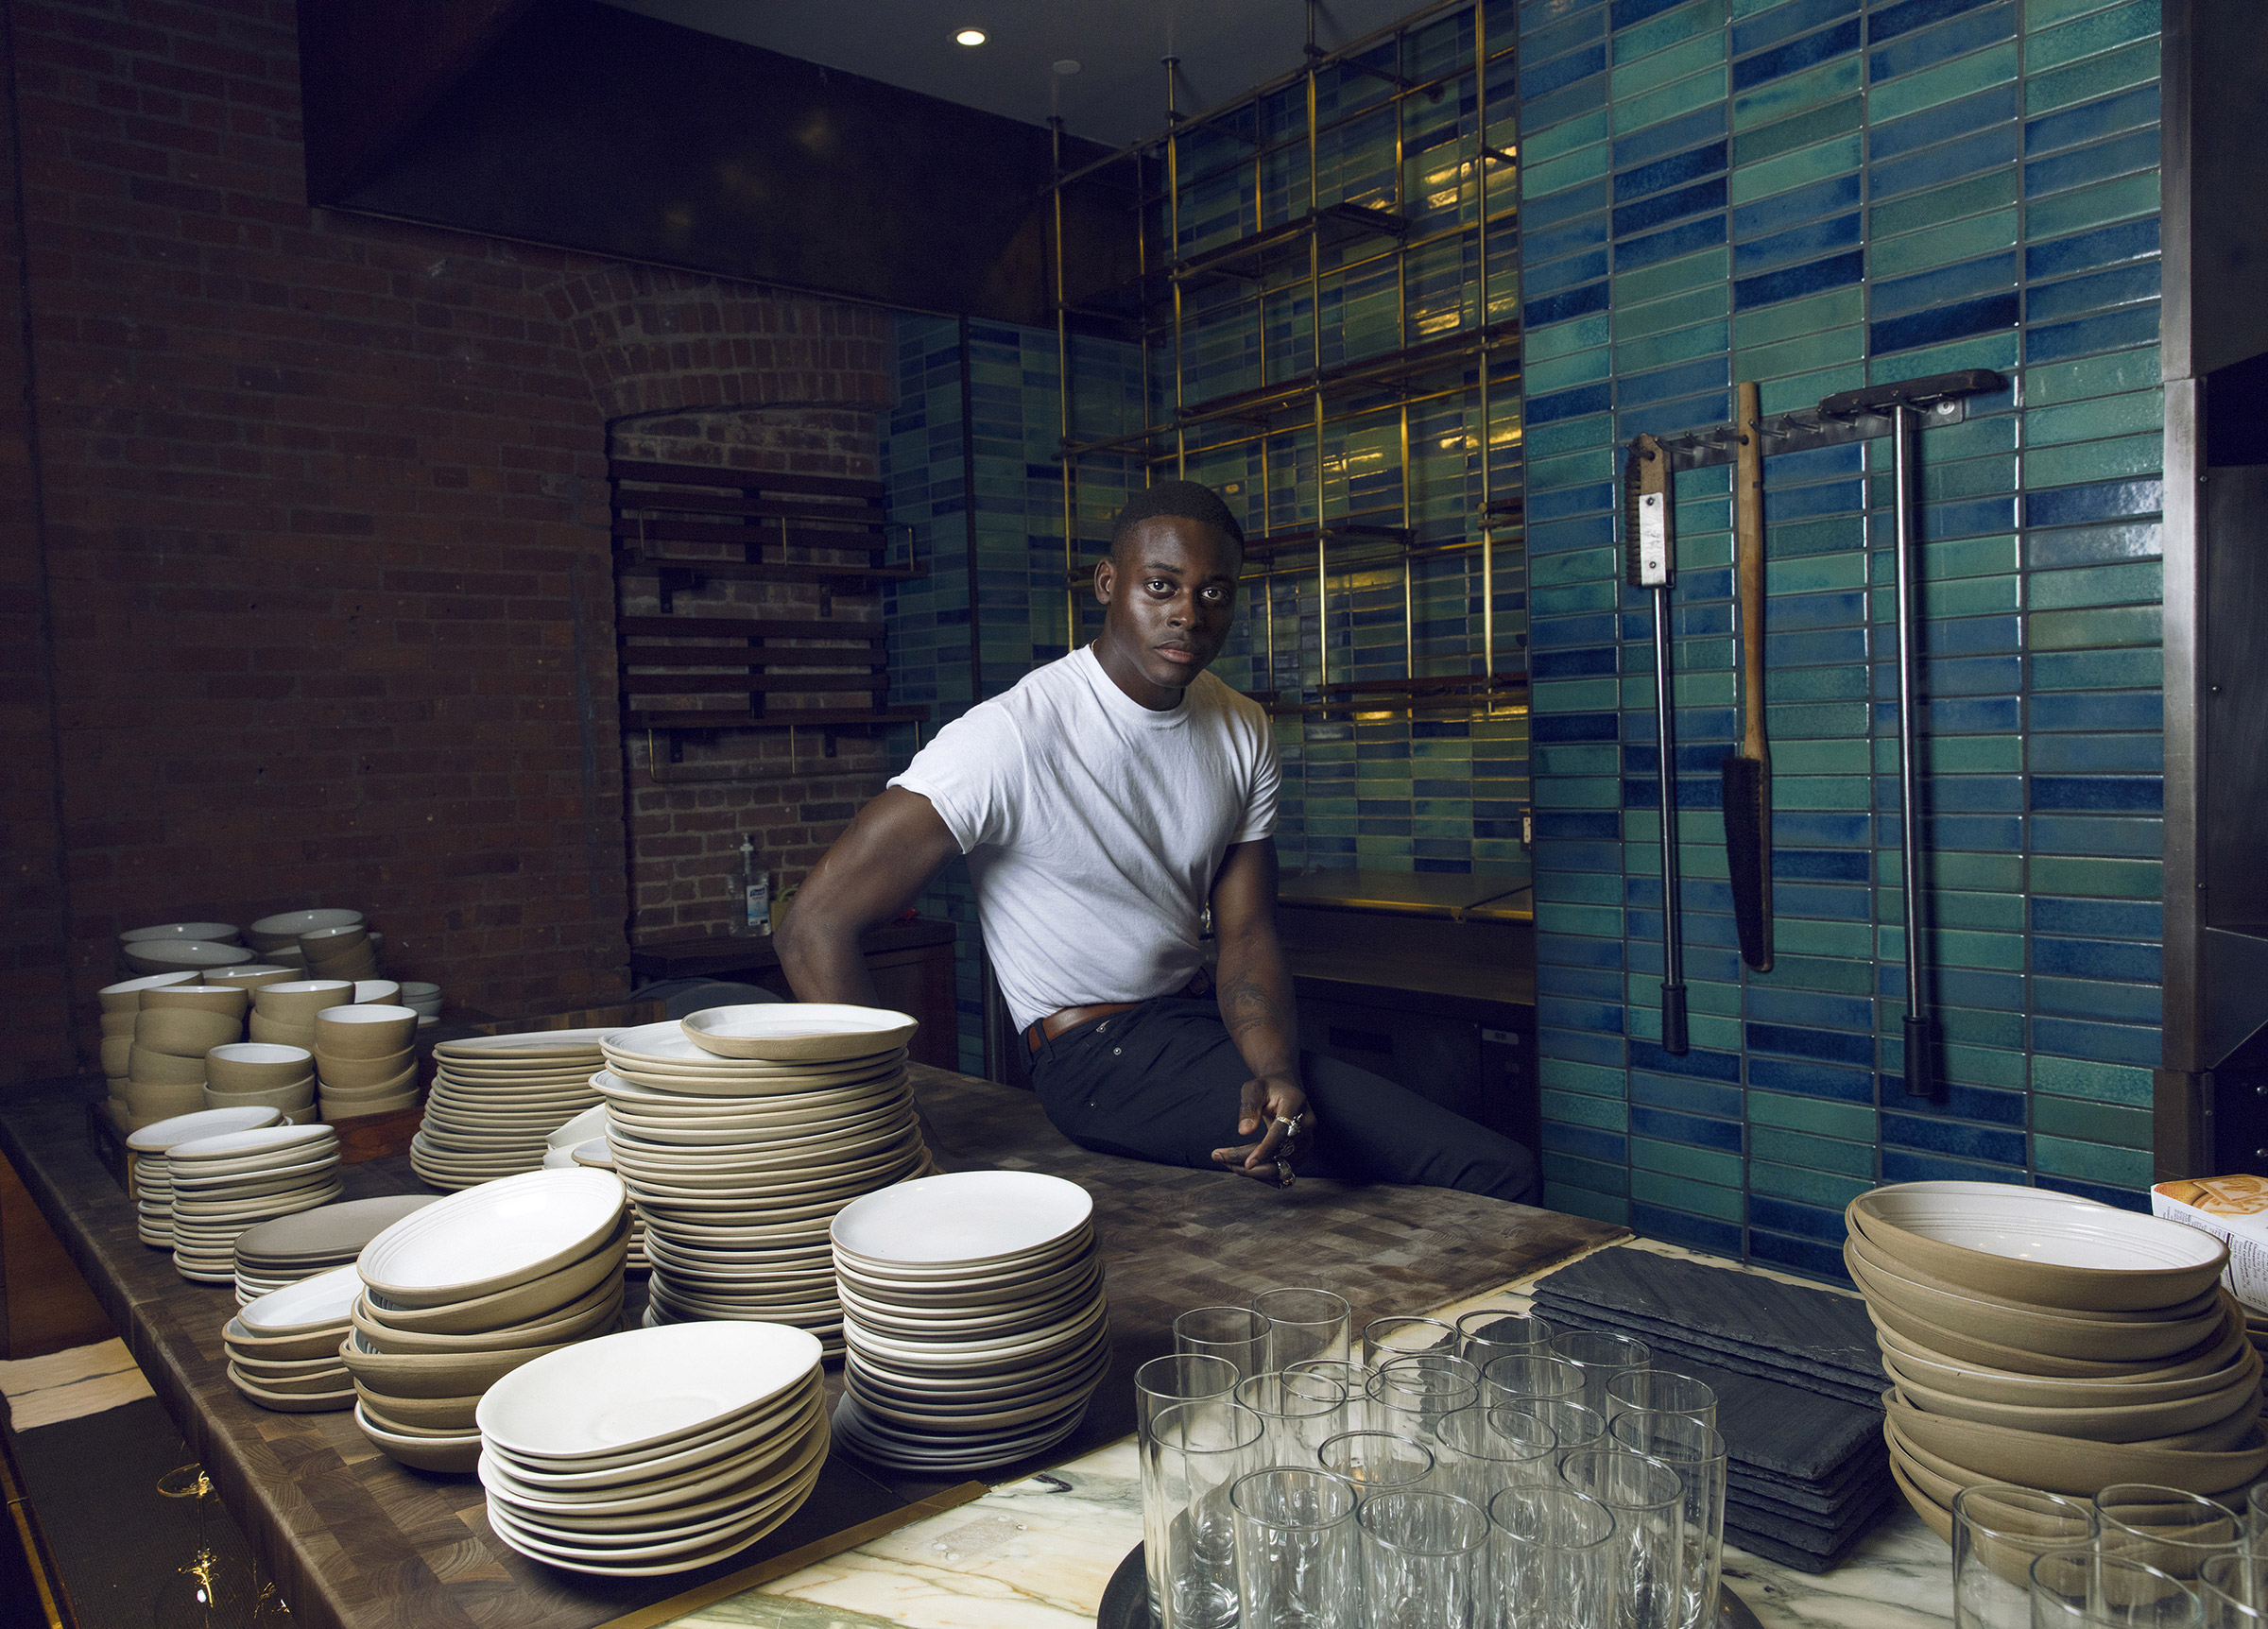 Rōze Traore at the Chefs Club New York in New York City, on Feb. 3, 2020. (Gioncarlo Valentine—The New York Times/Redux)